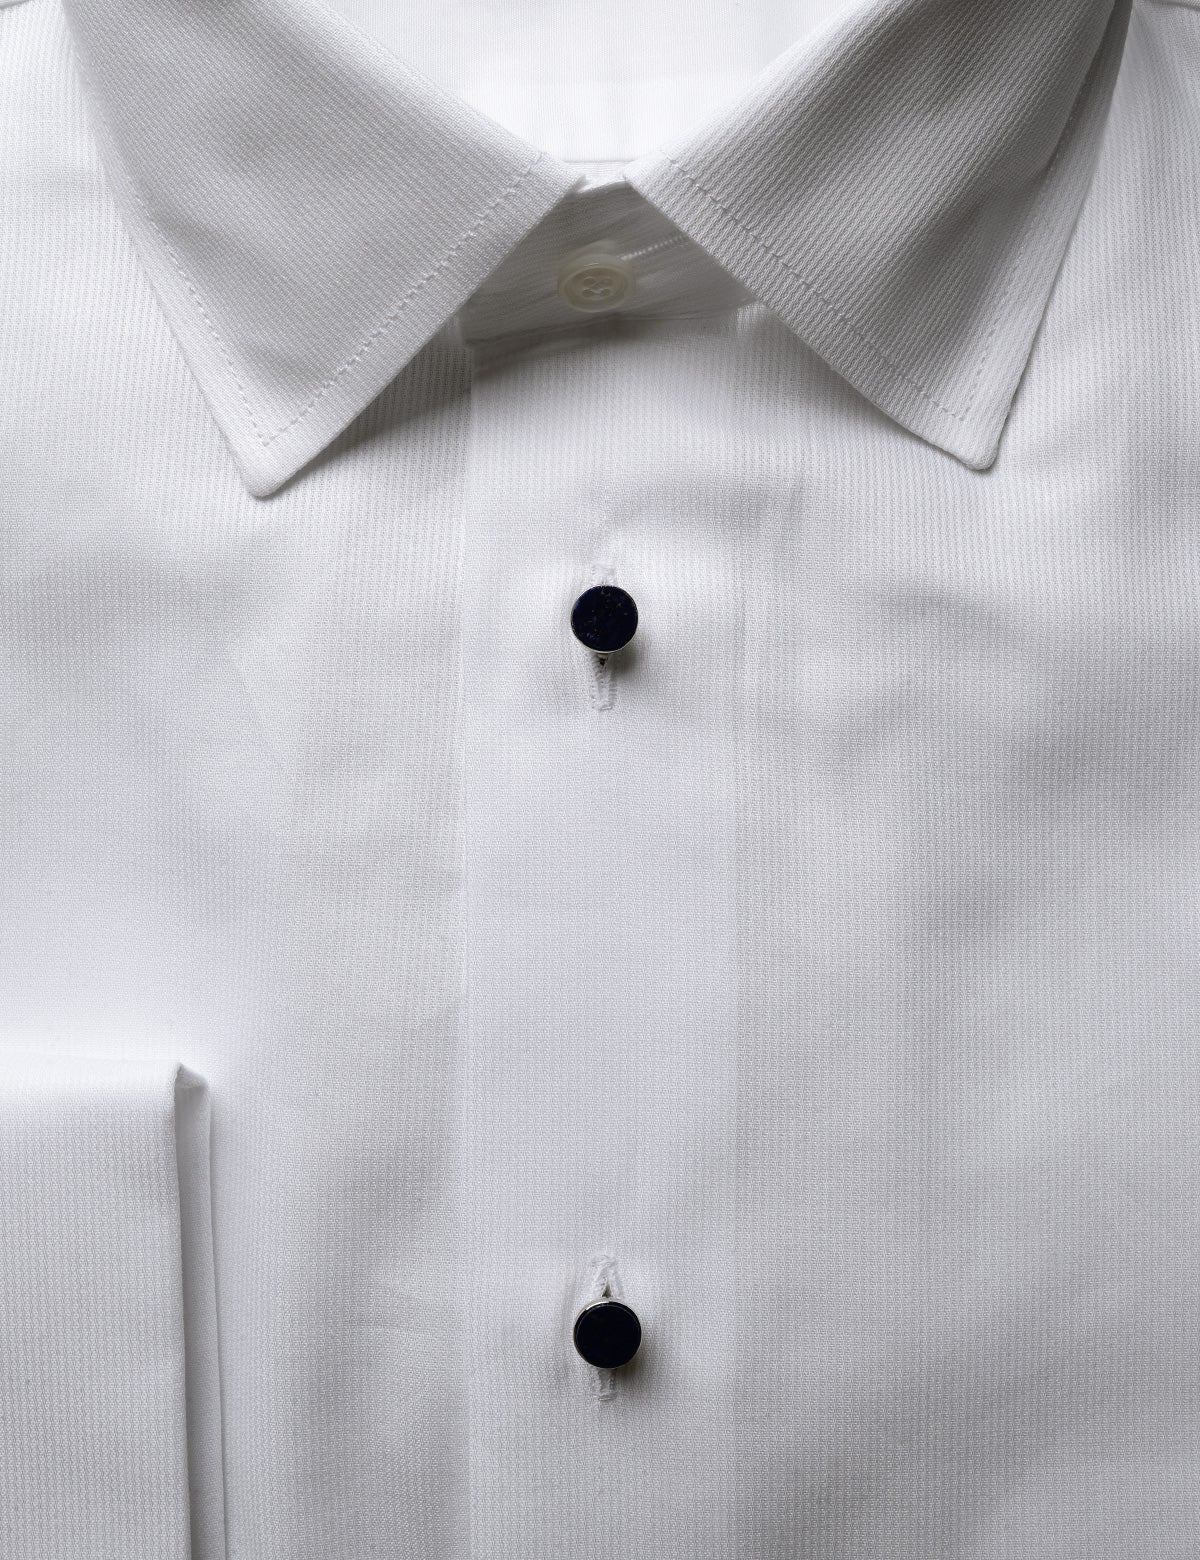 Detail of placket using shirt studs instead of removable button strip